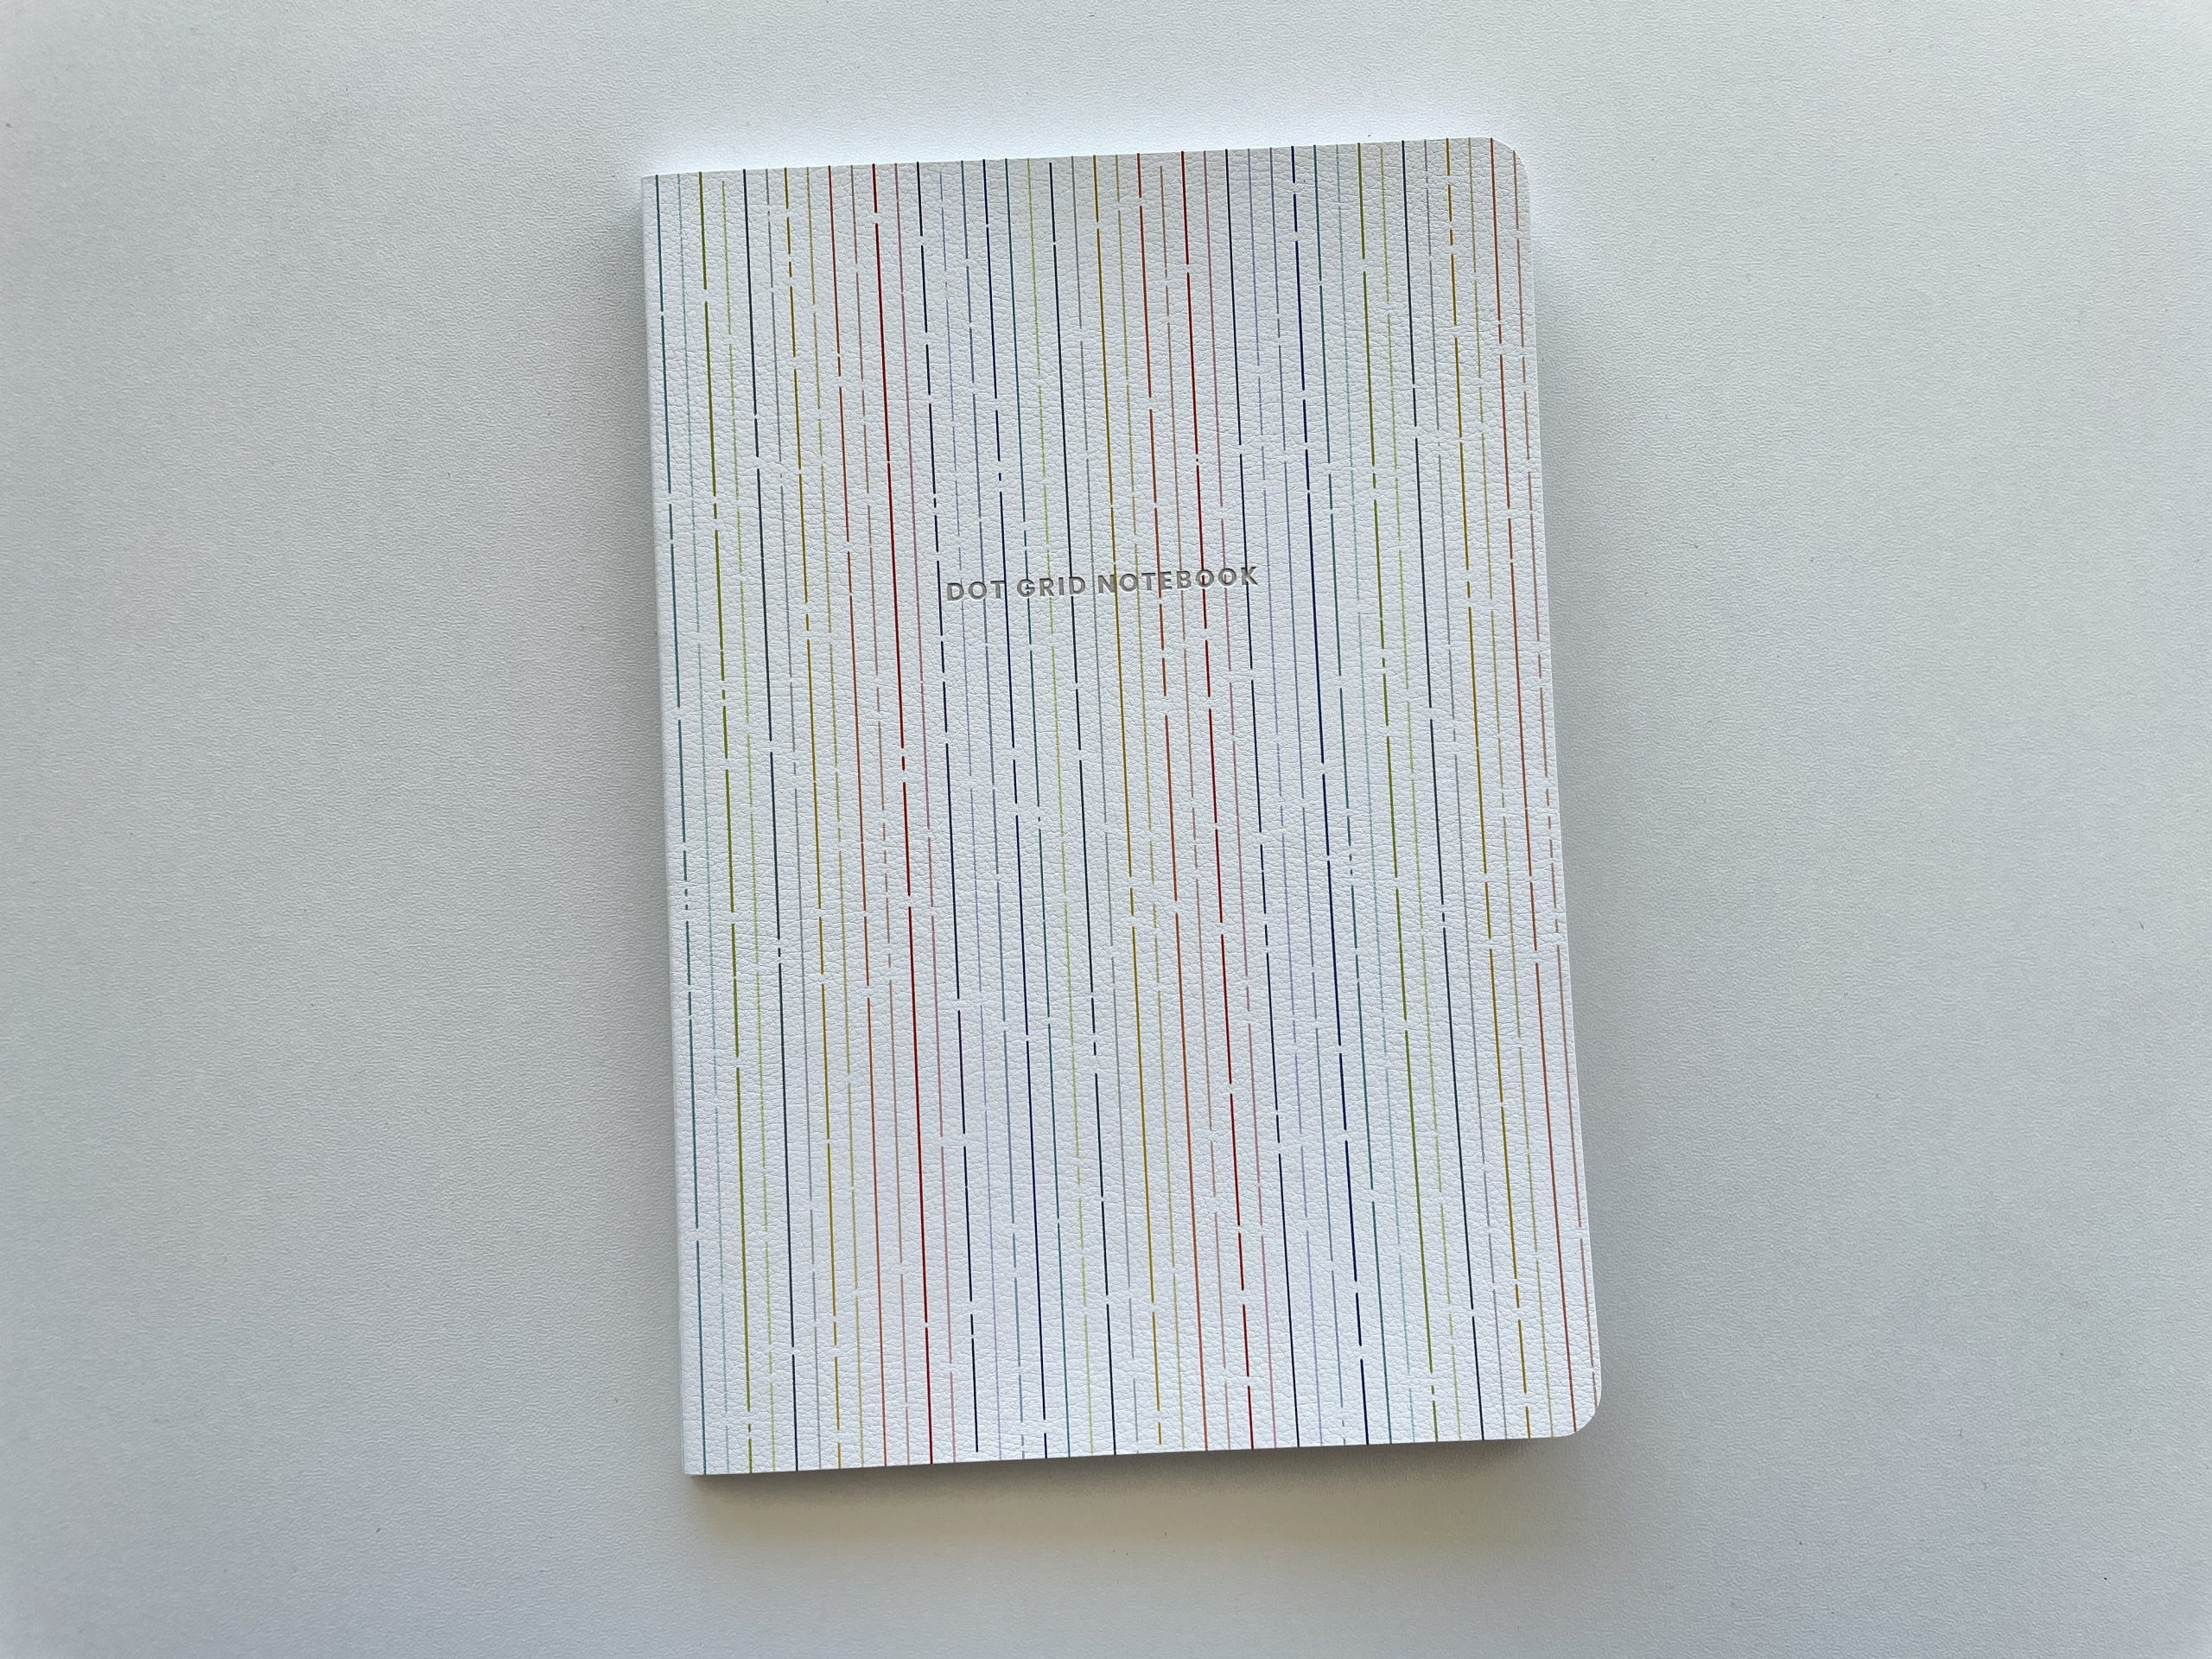 maskelife dotted notebook review 6mm grid rainbow pen testing